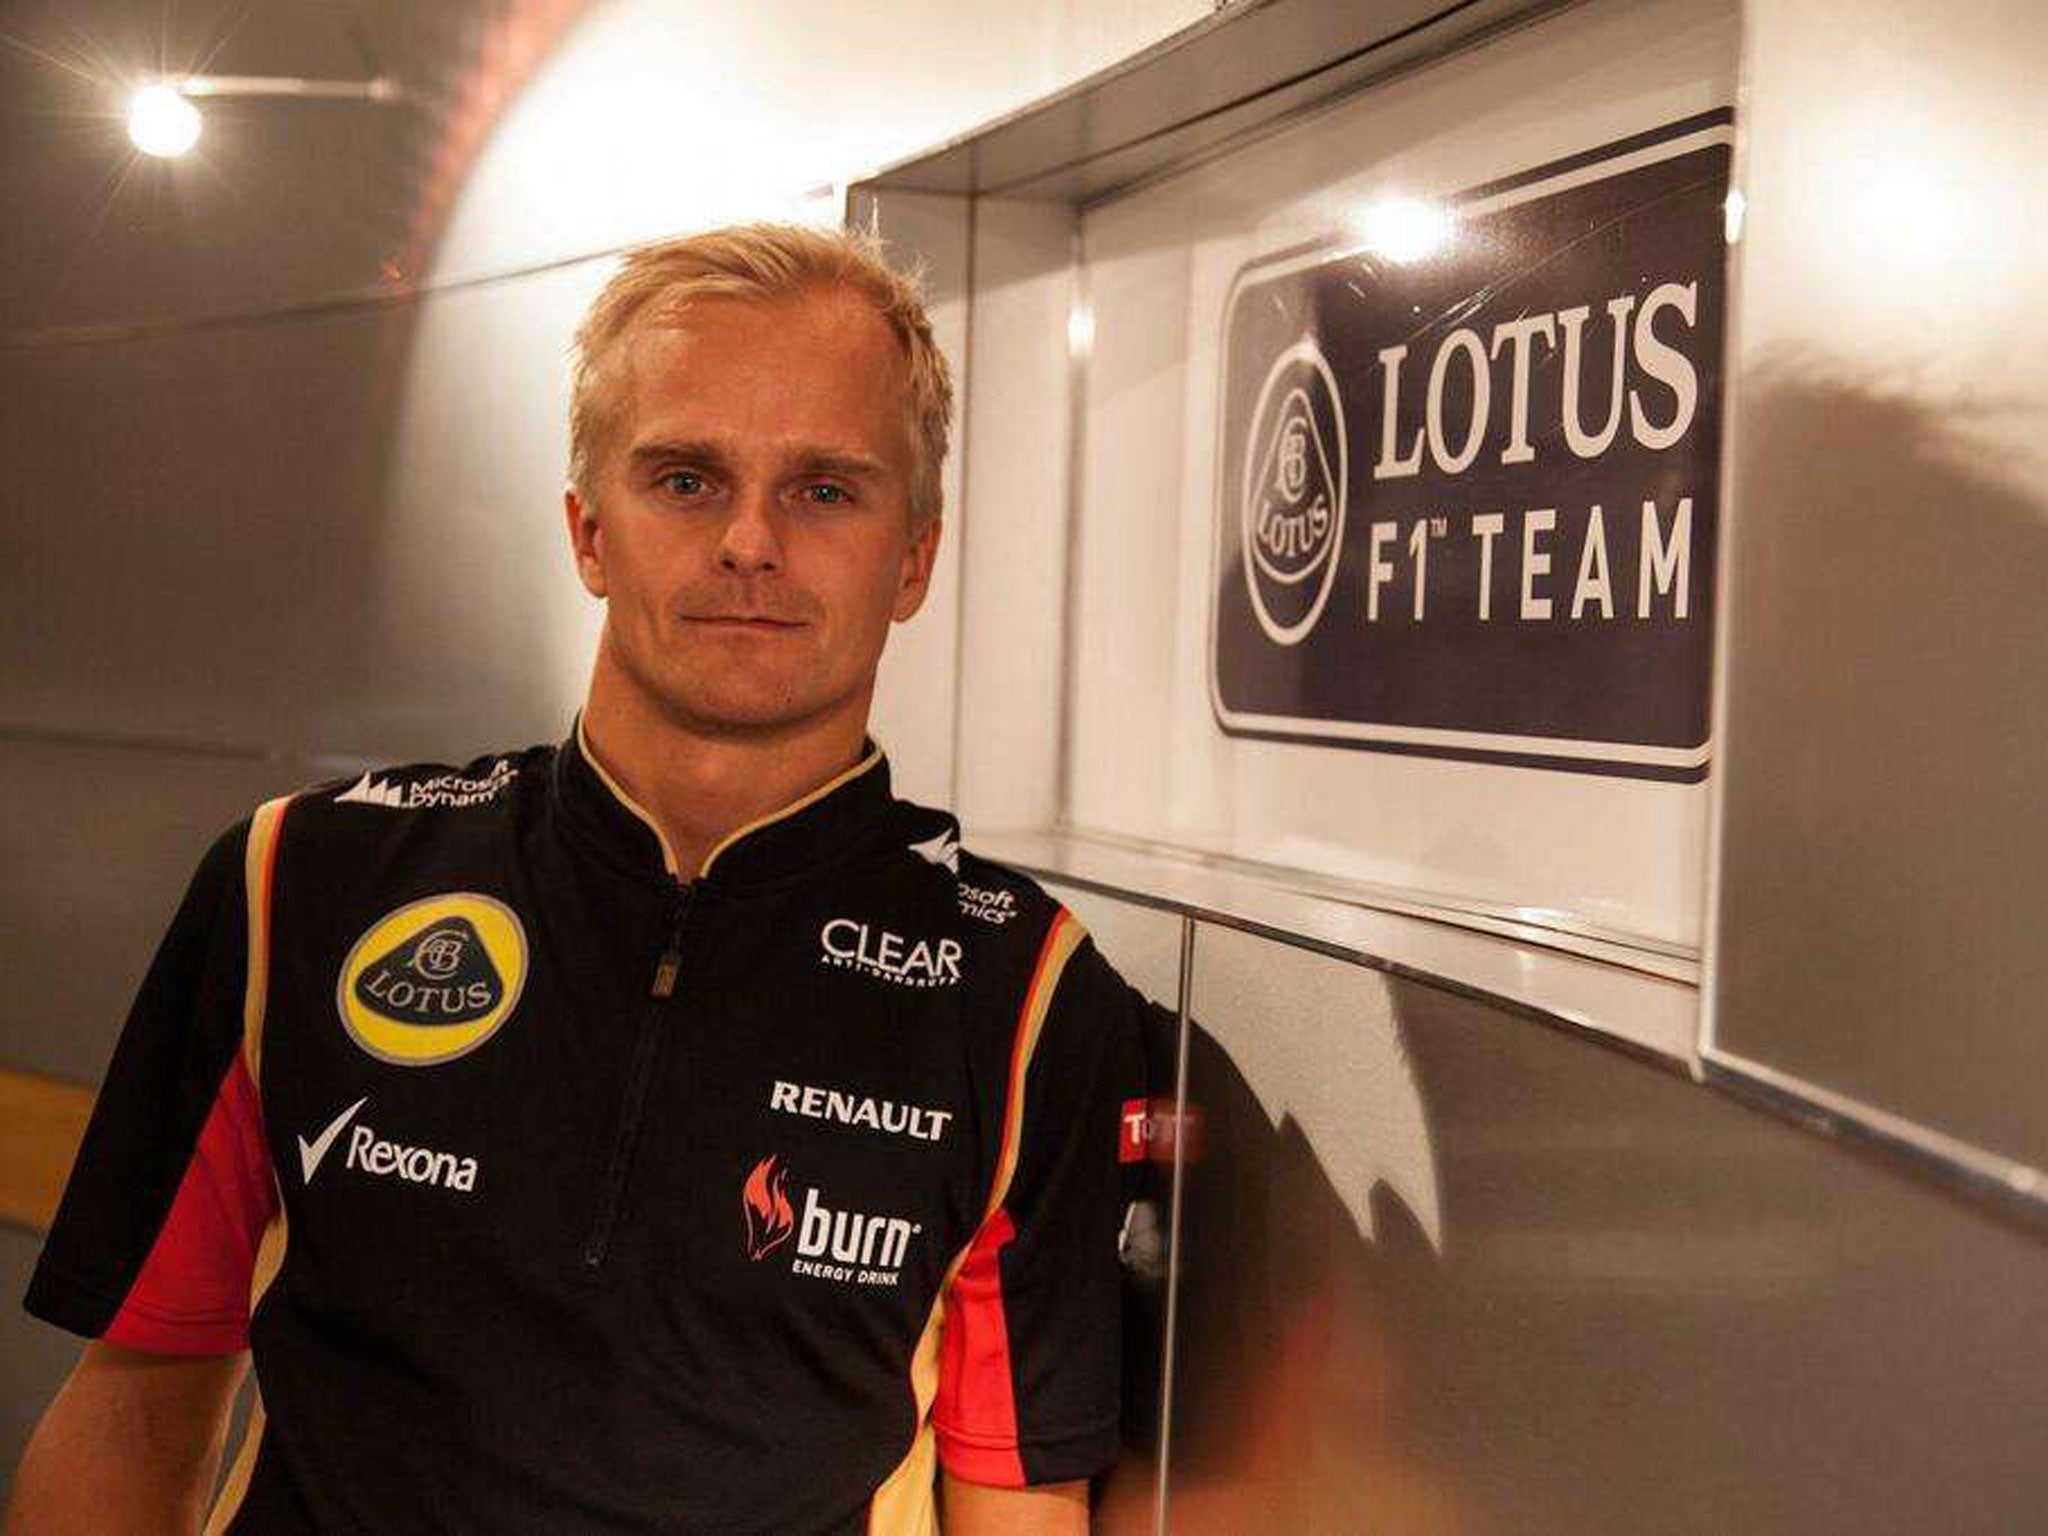 Lotus have confirmed that Heikki Kovalainen will replace Kimi Raikkonen for the last two grand prix's of the season